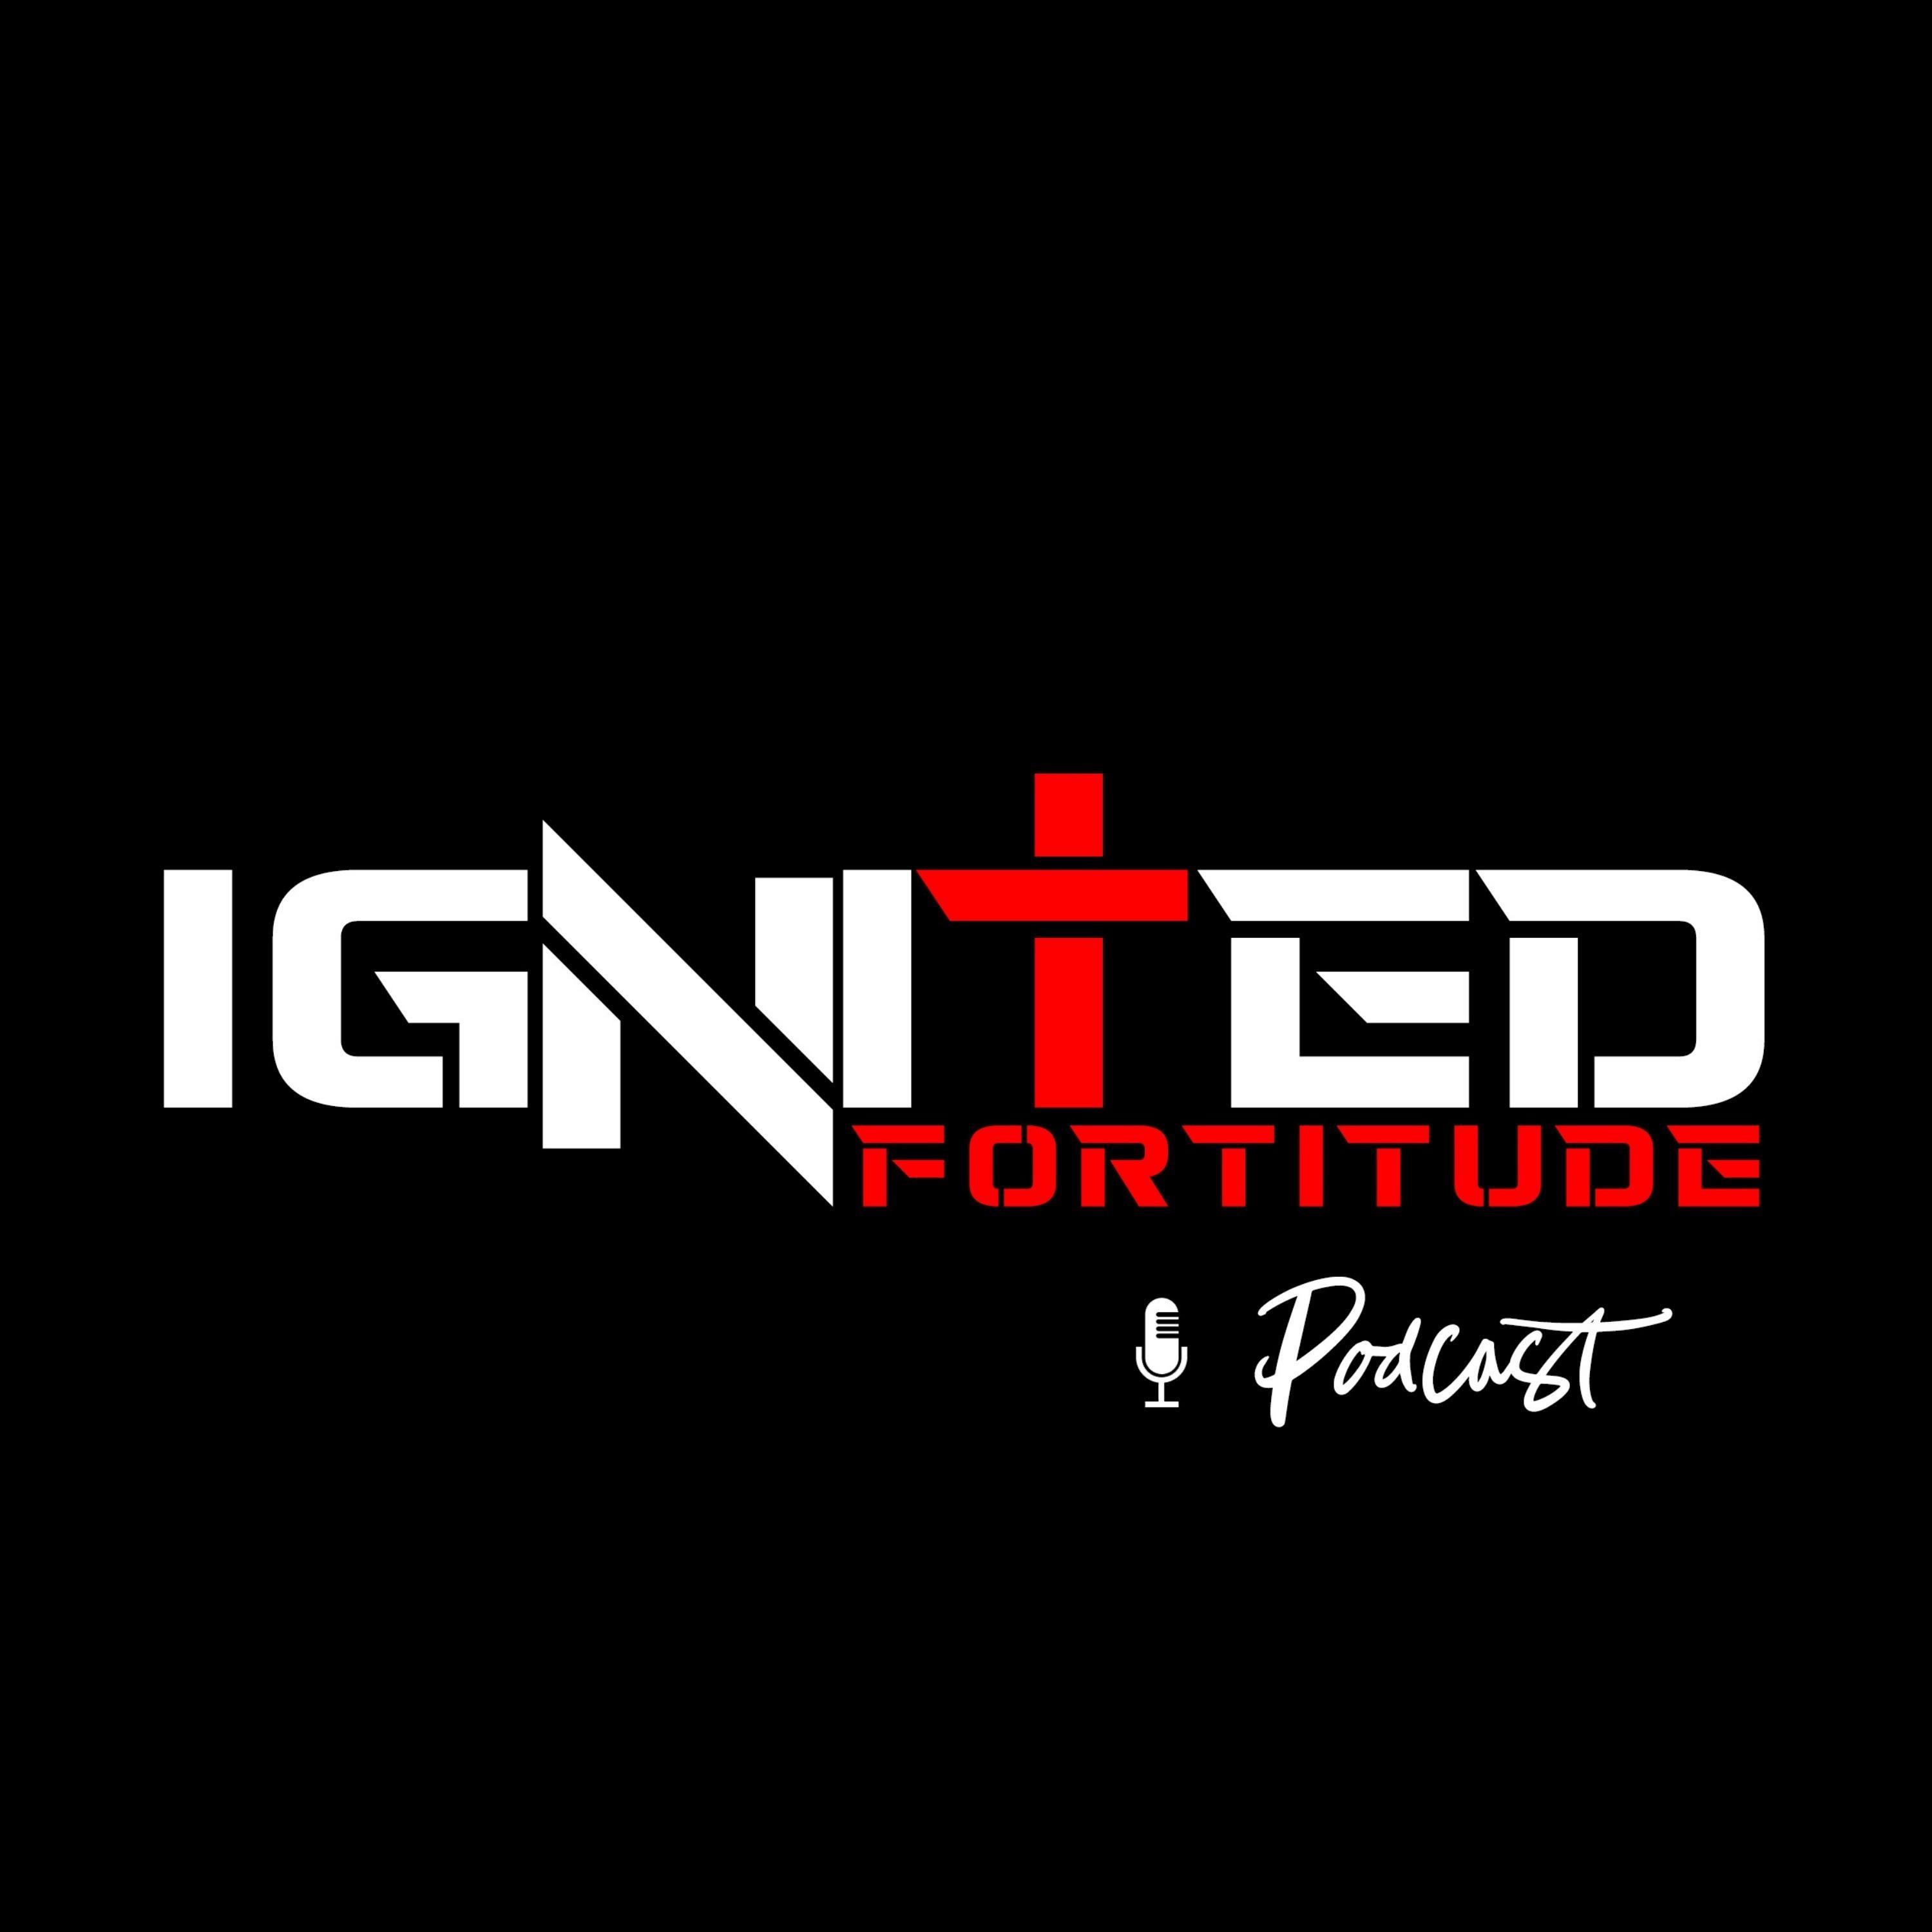 Ignited Fortitude